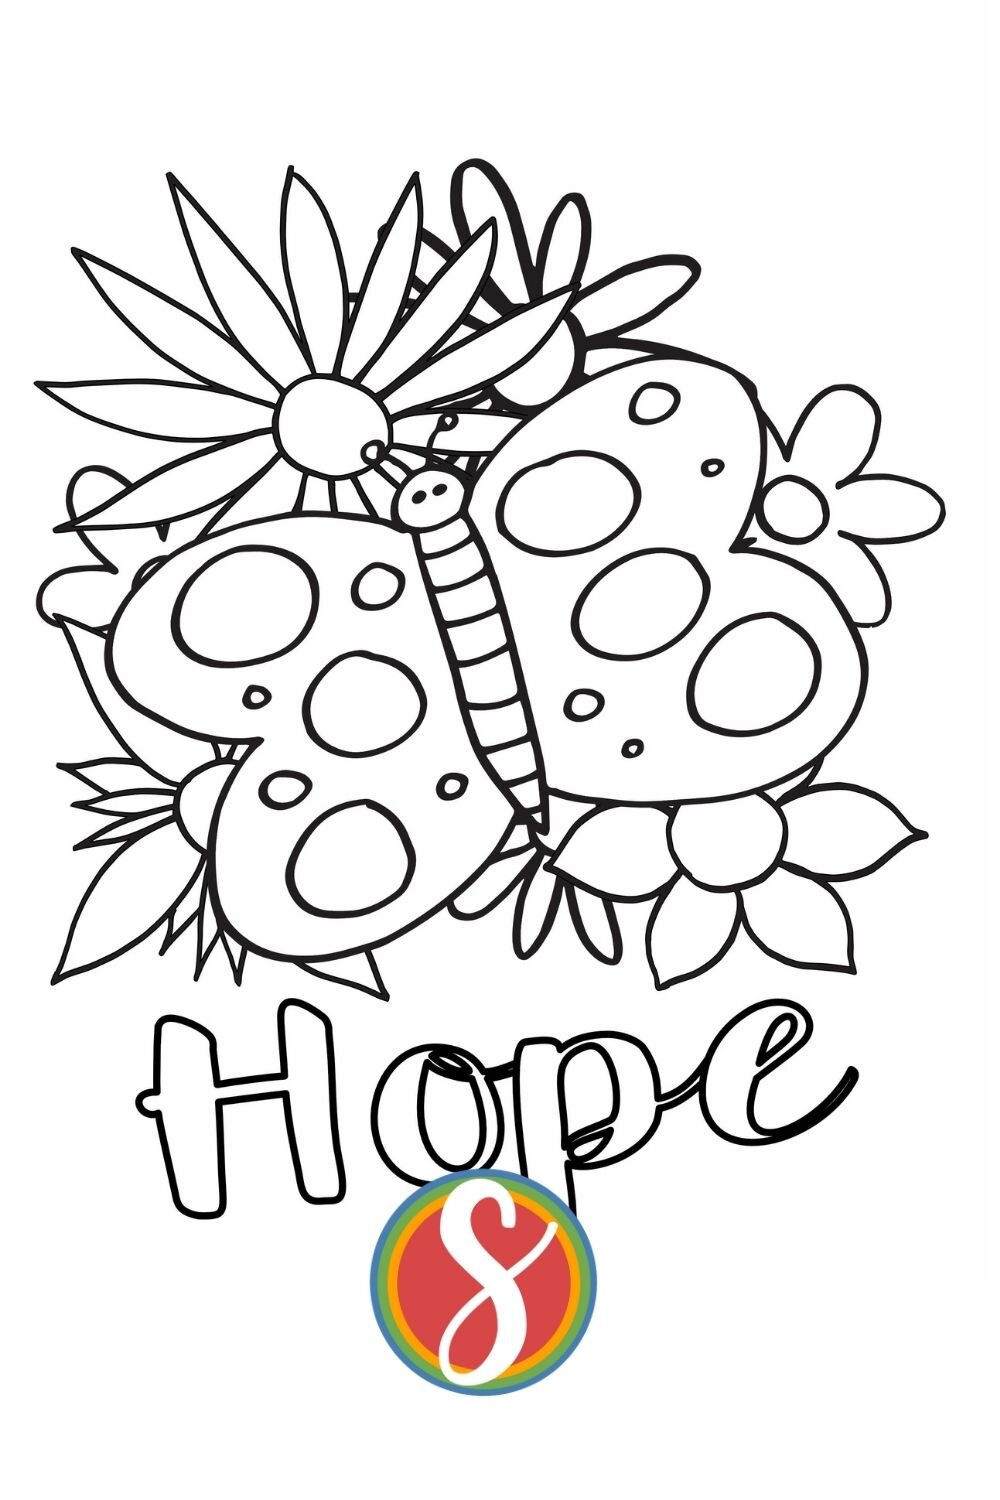 Hope with a butterfly and flowers and hope free printable coloring page from Stevie Doodles